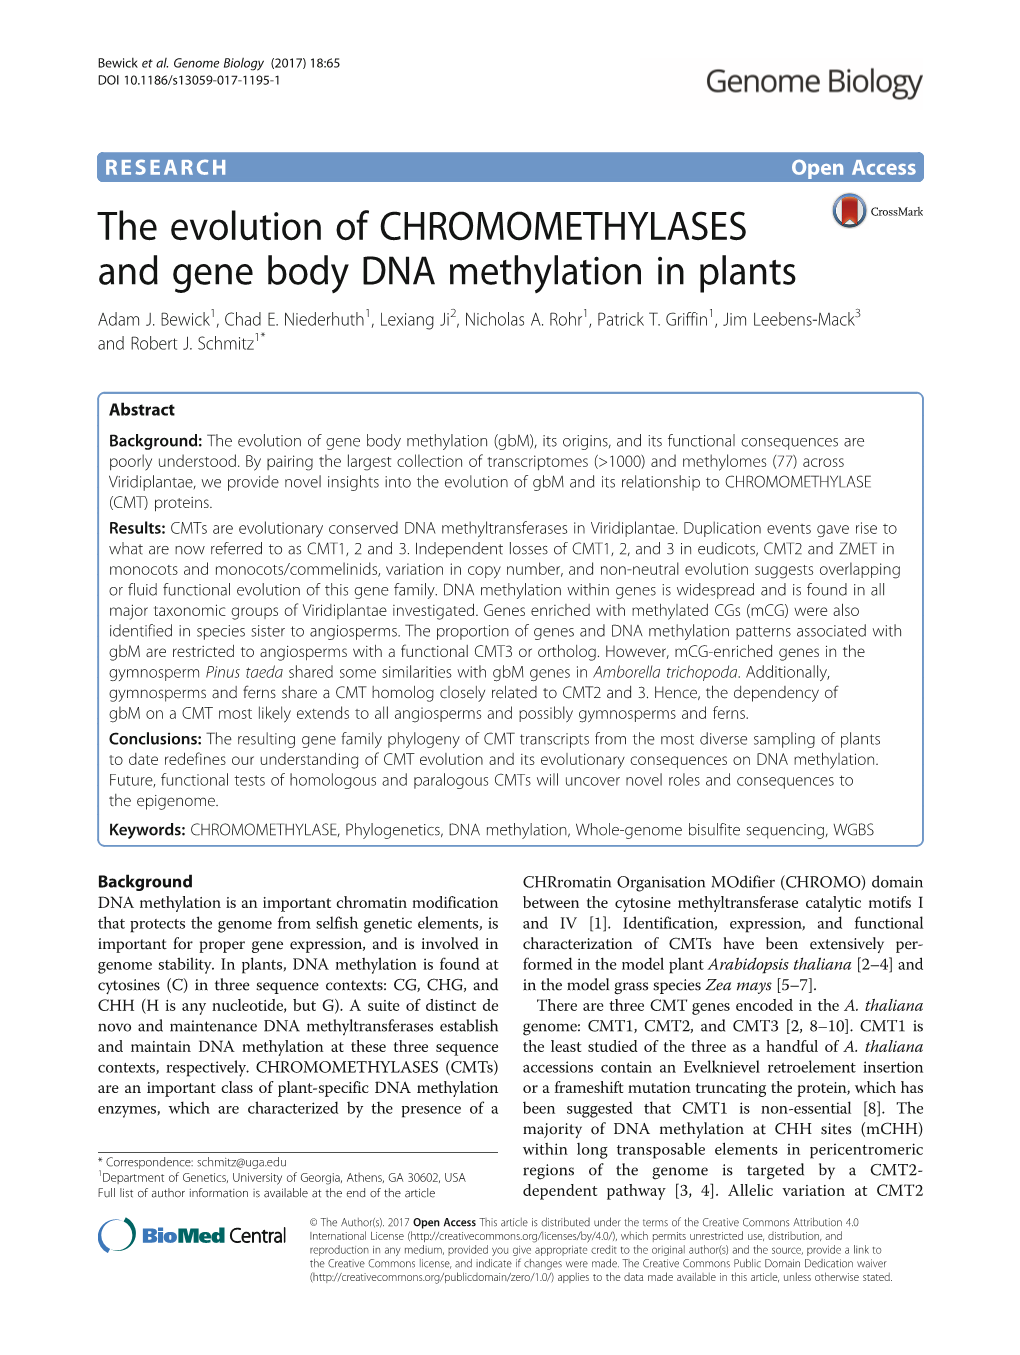 Downloaded from Proteins That Evolved Prior to the Diversification of Embry- Phytozome, That Were Not Included in Sequences Gener- Ophyta